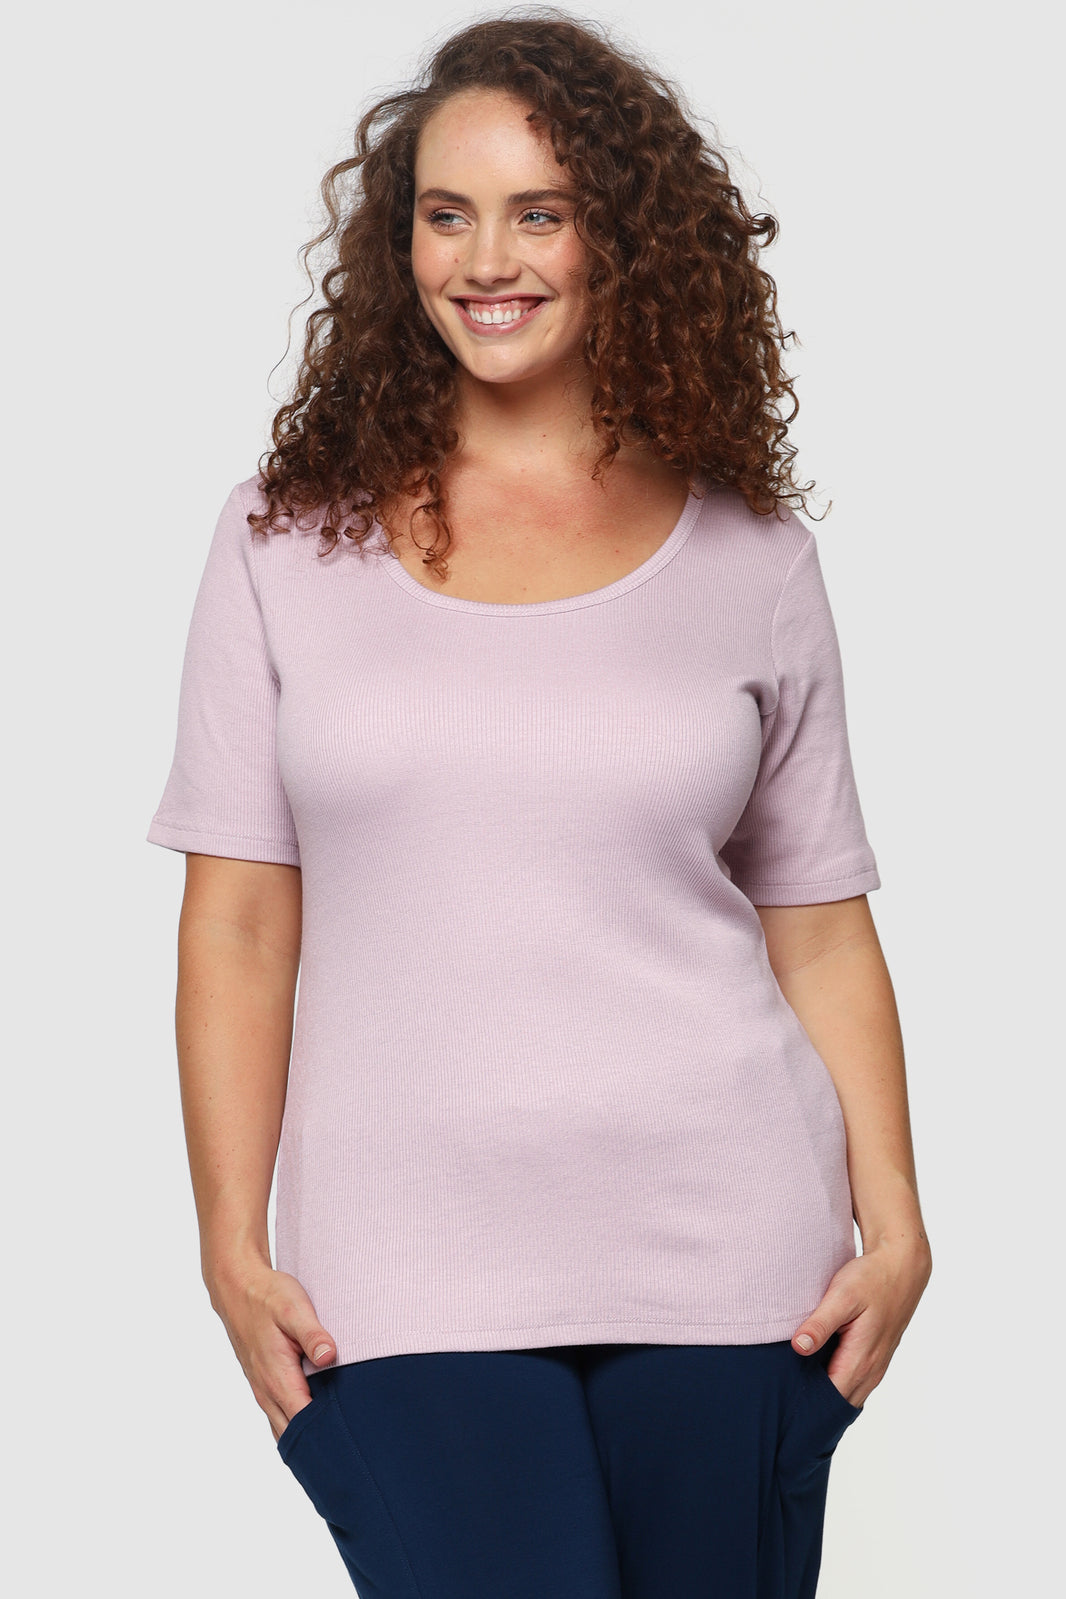 Ribbed Above Elbow Scoop - Mauve